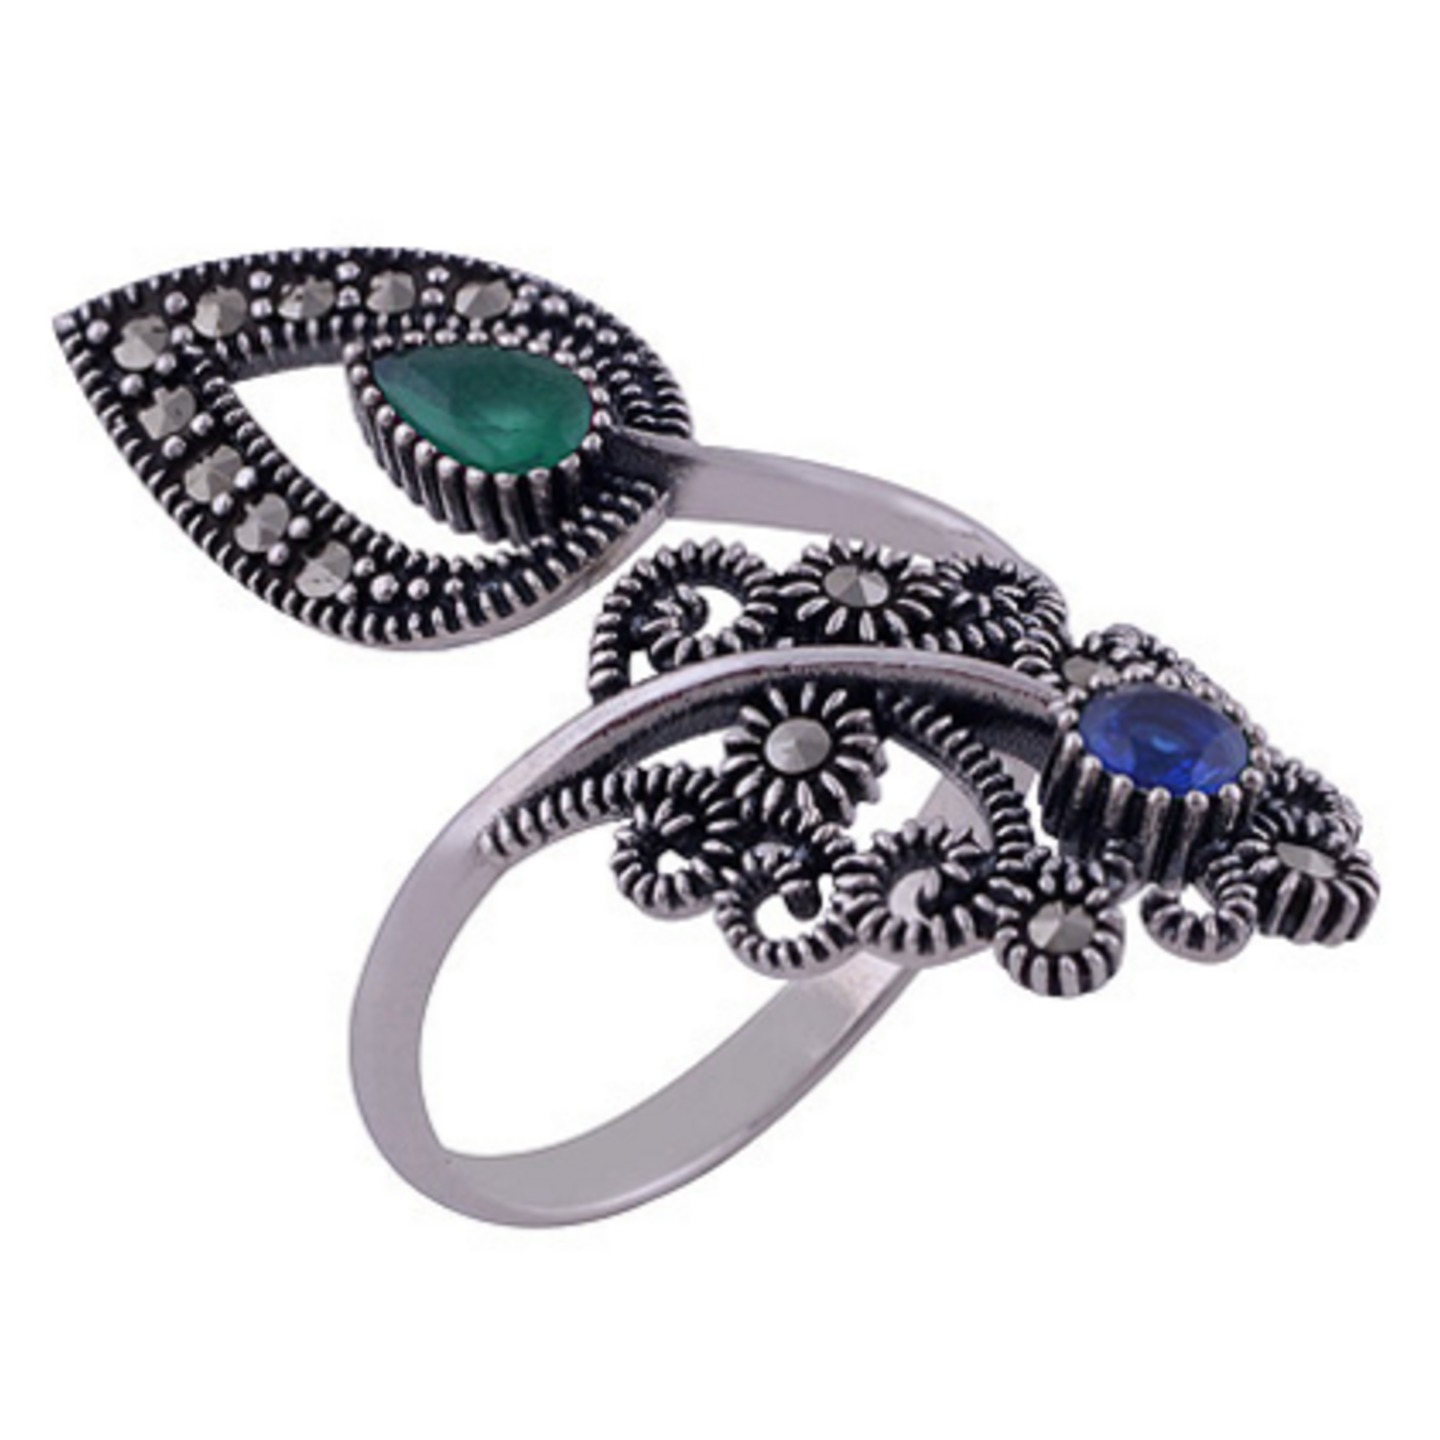 The Blue Green Pasley Silver Ring